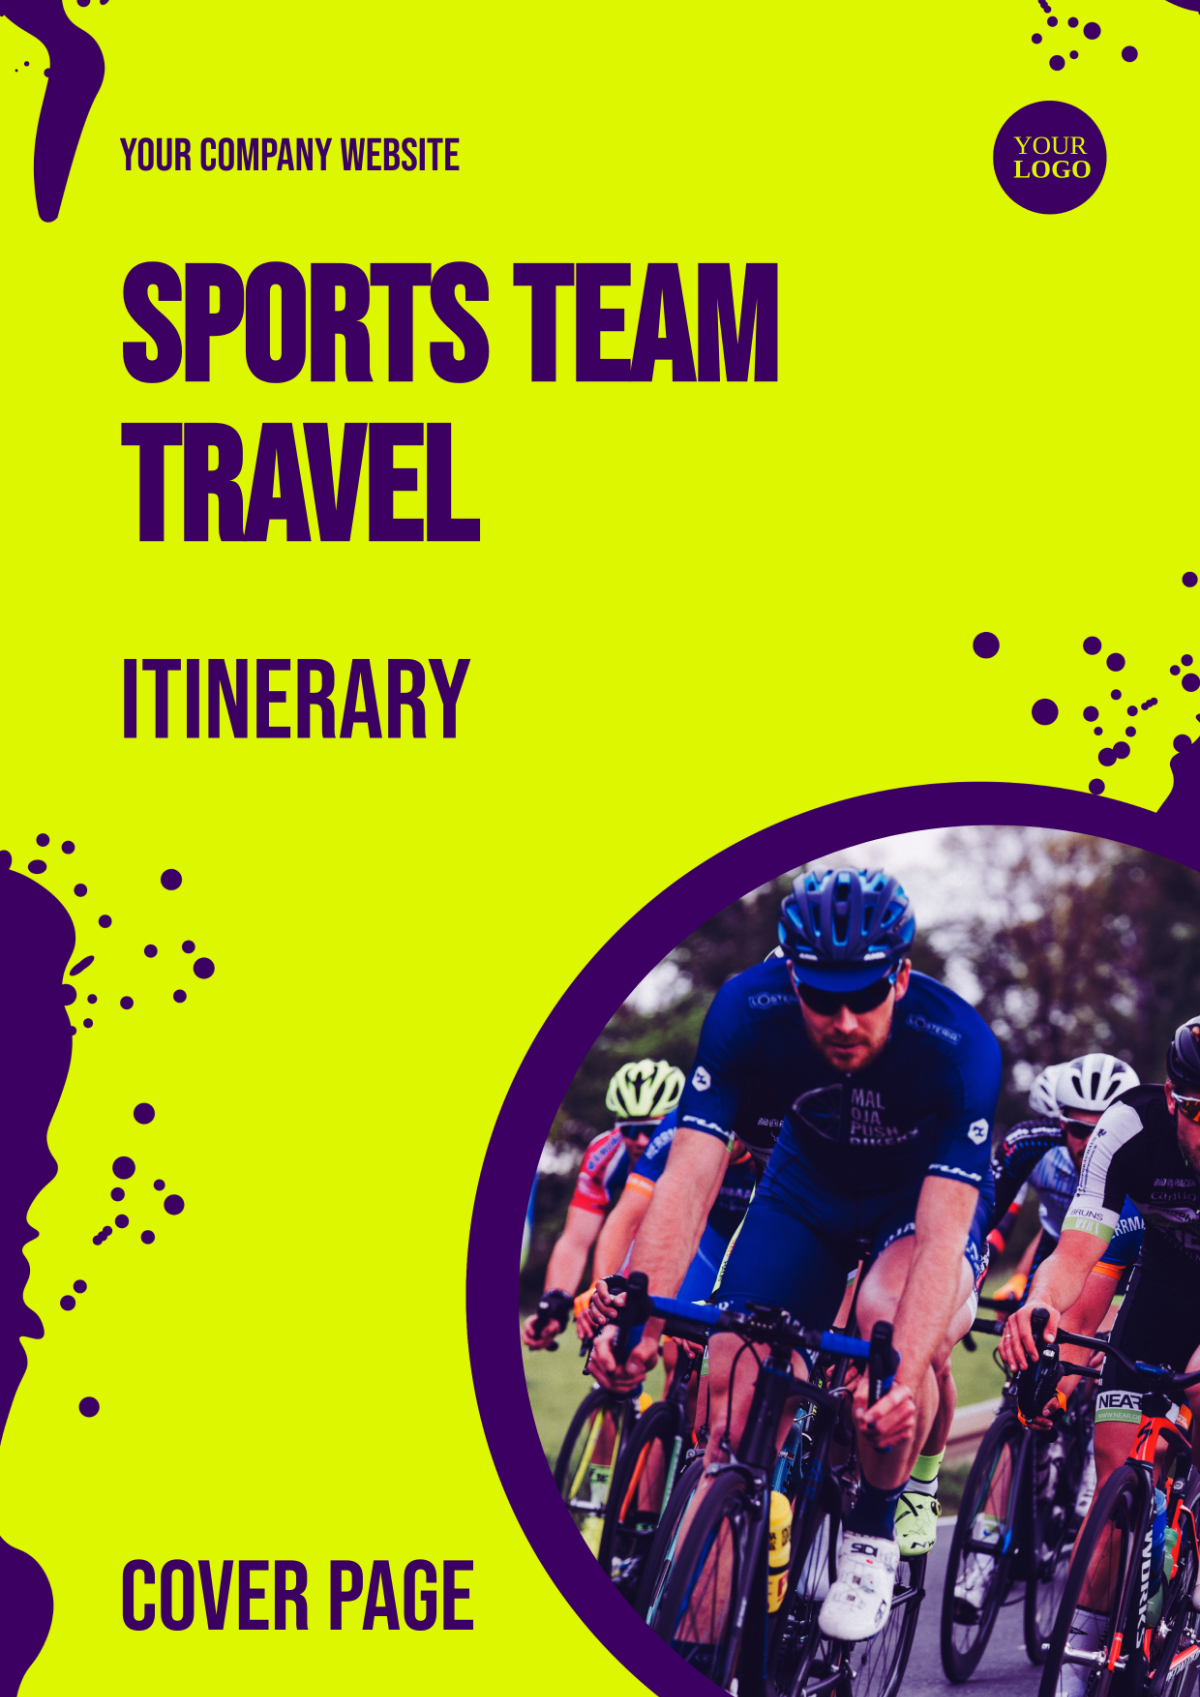 Sports Team Travel Itinerary Cover Page